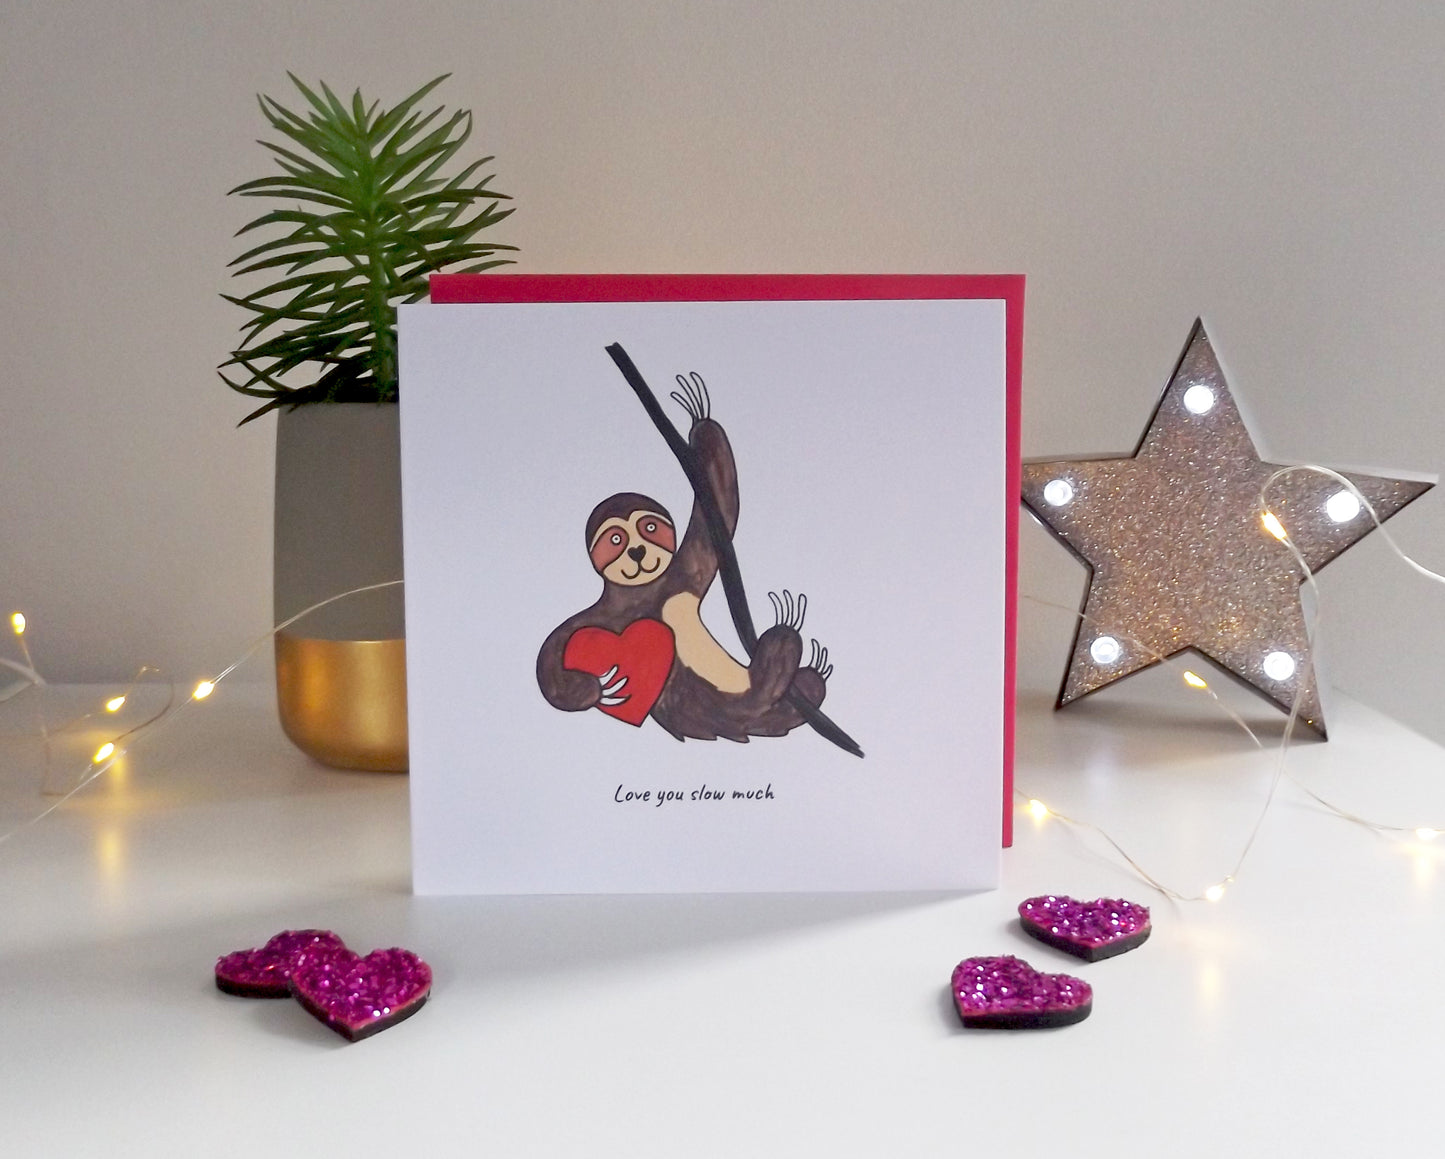 Love you slow much - funny sloth valentine's card